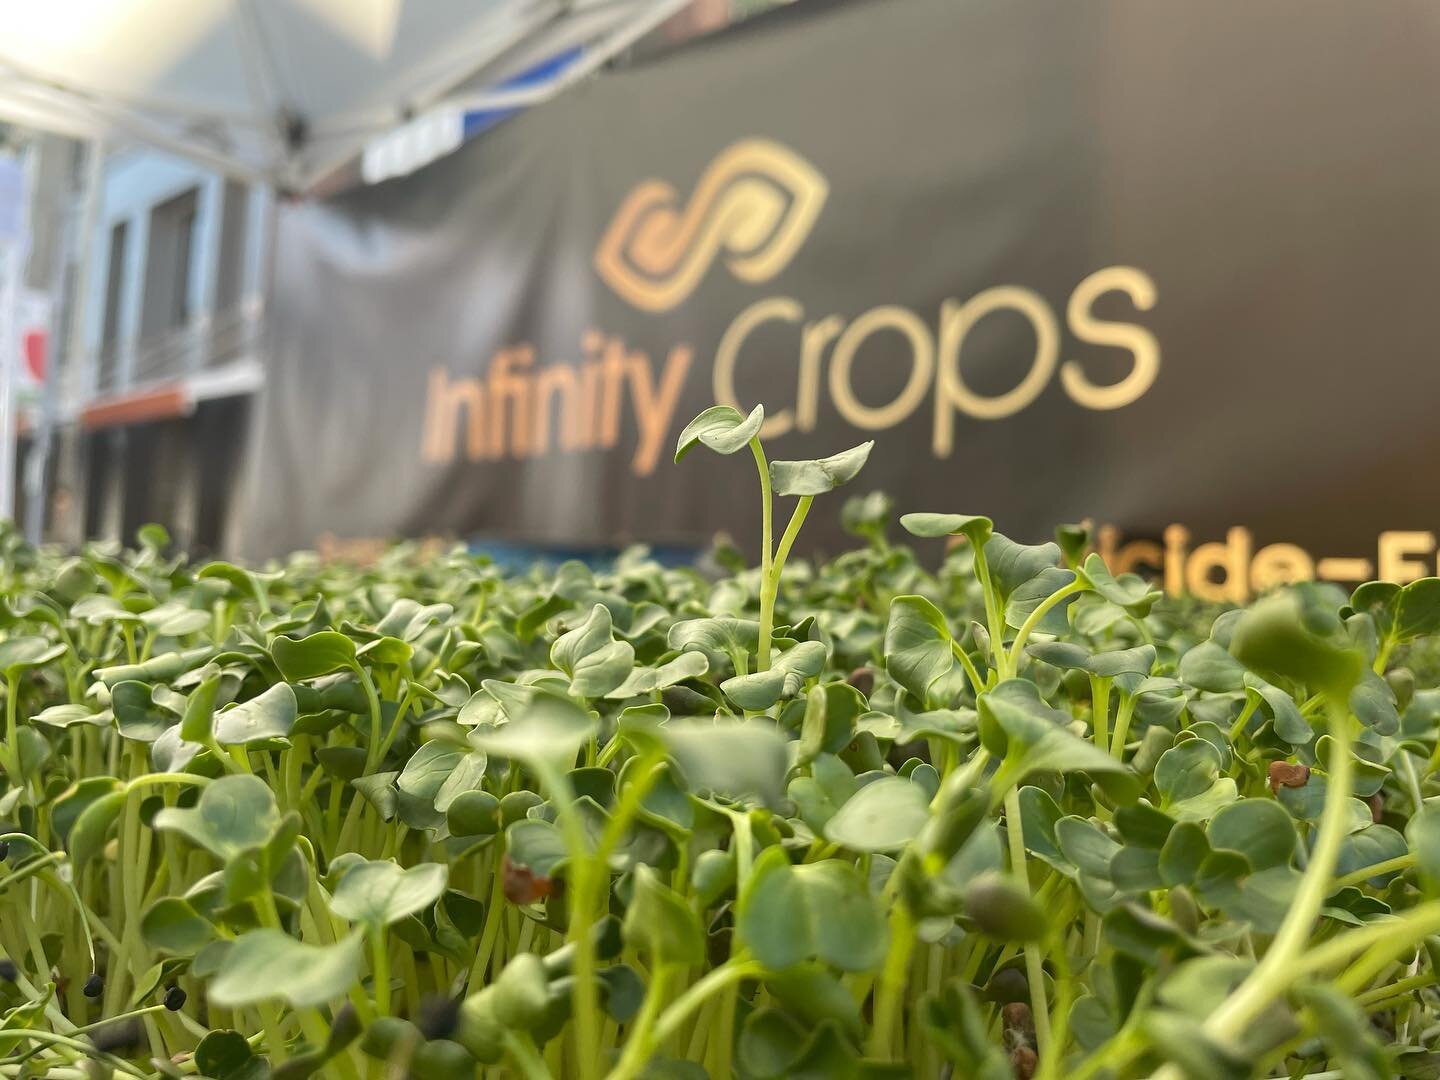 At Infinity Crops, our goal is to decentralize the agriculture industry by bringing modern, sustainable growing practices to the hearts of urban cities. Give us a follow, sit back, and join us on this journey together.